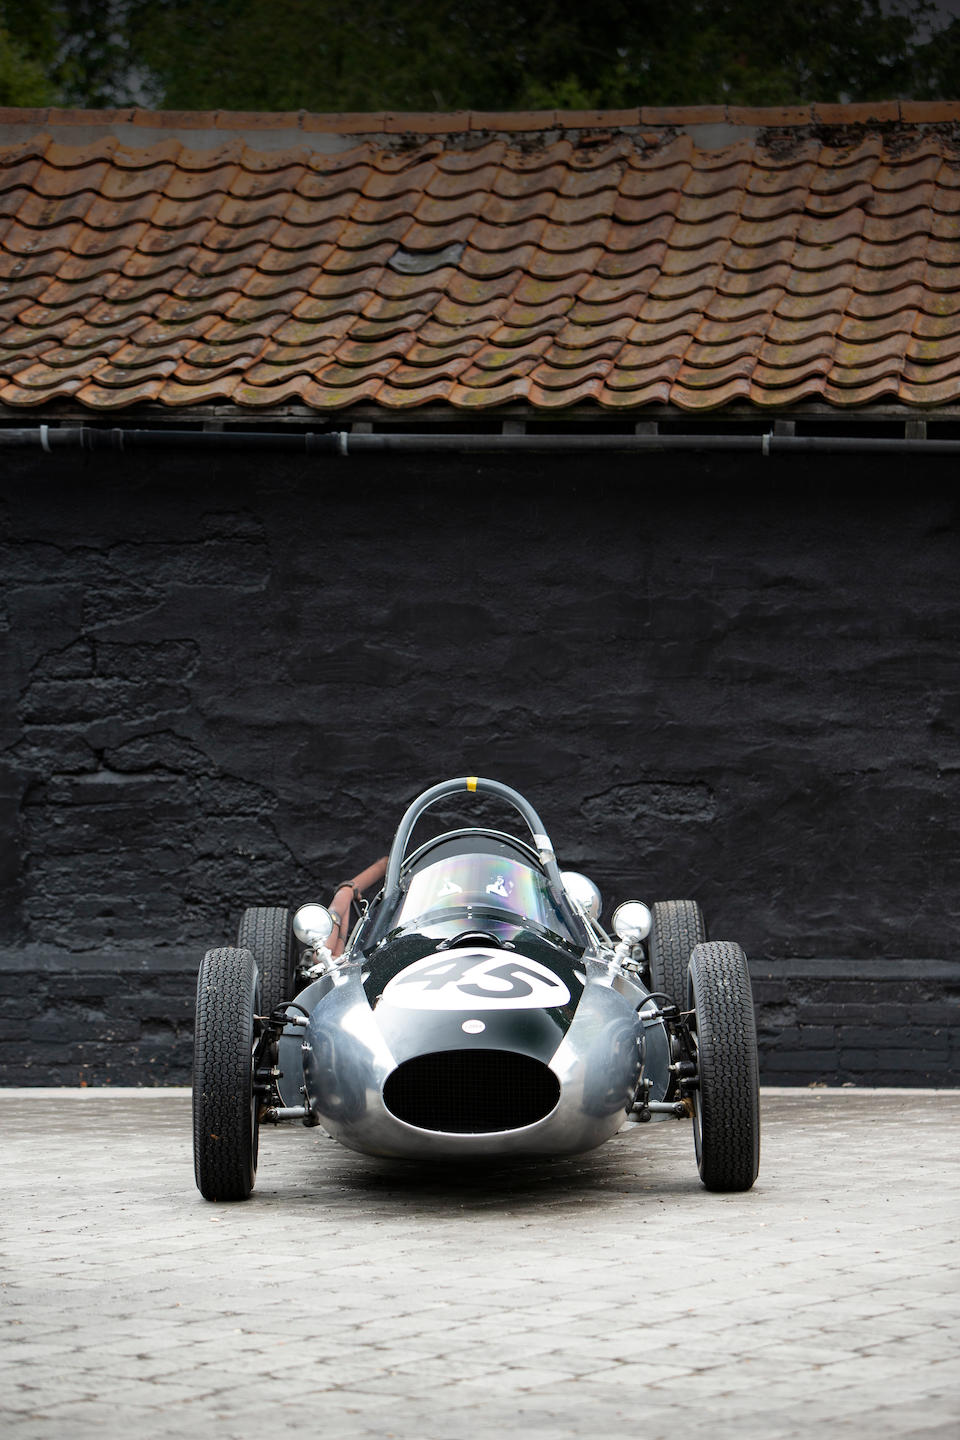 The ex-Jim Russell, Mike McKee ,1958 Cooper-Climax Type 45 Formula 2 Single Seater  Chassis no. F2-8-58